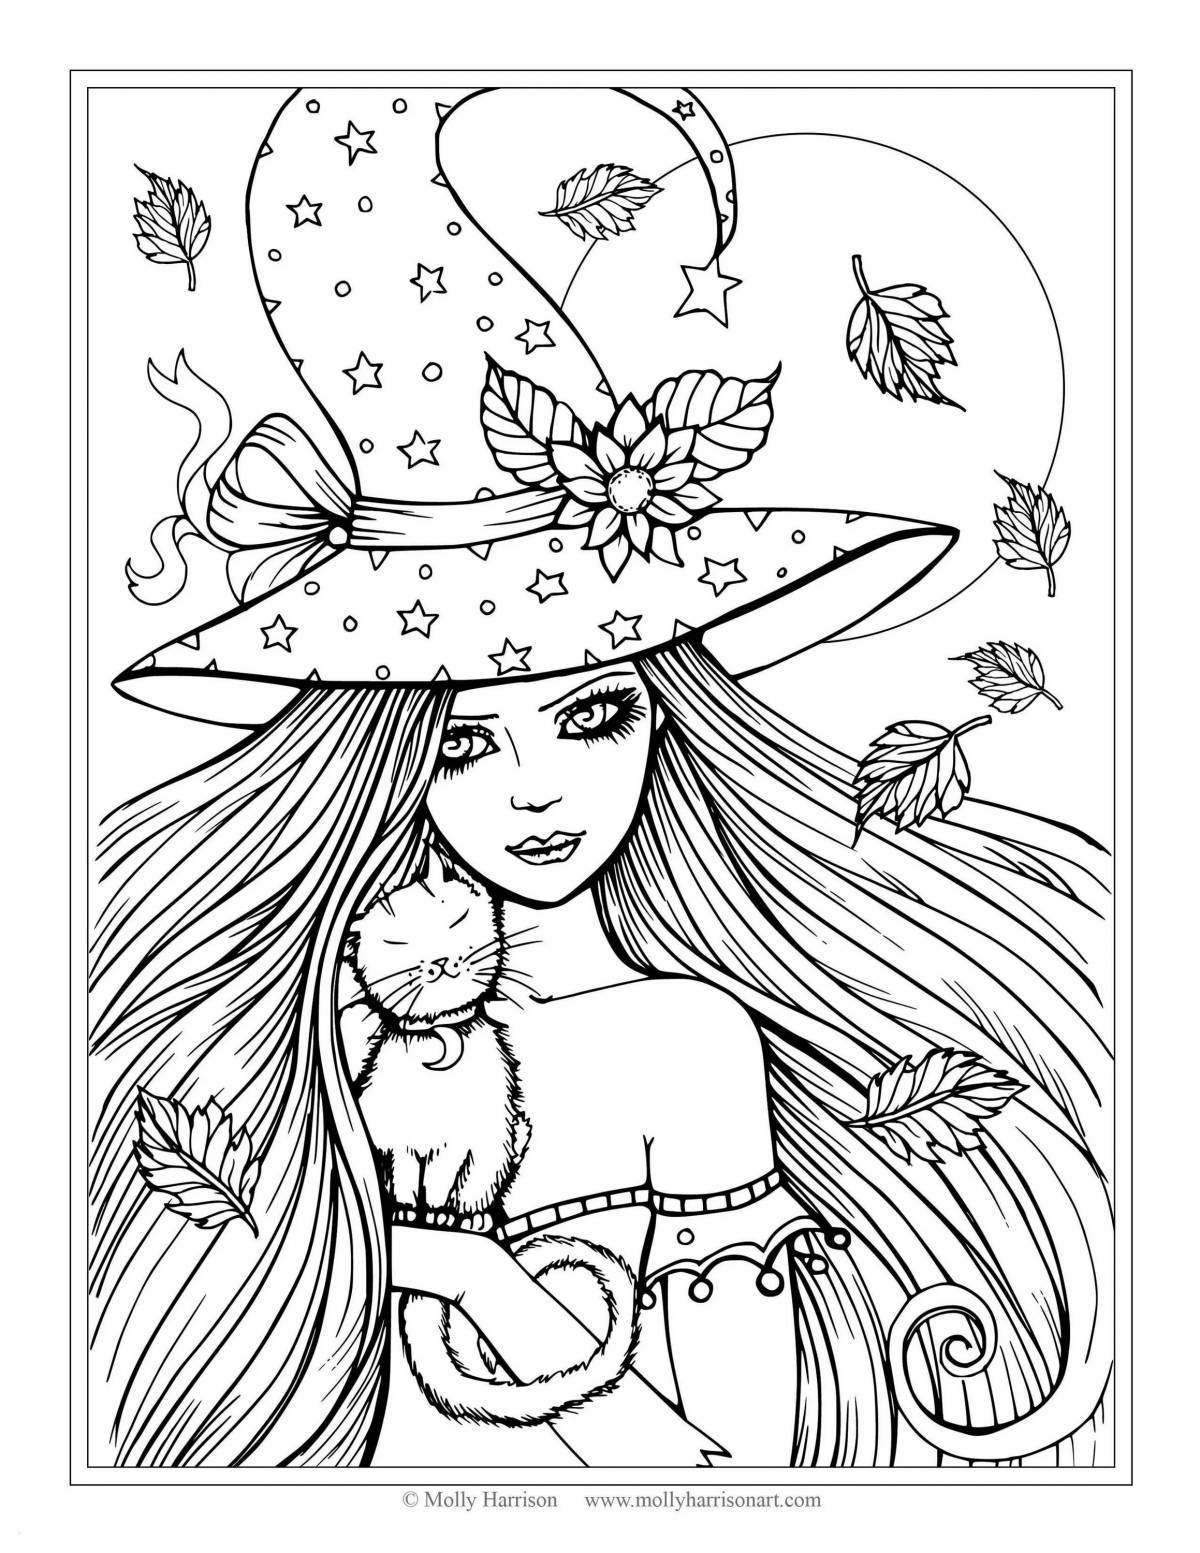 Great 19 year old coloring book for girls